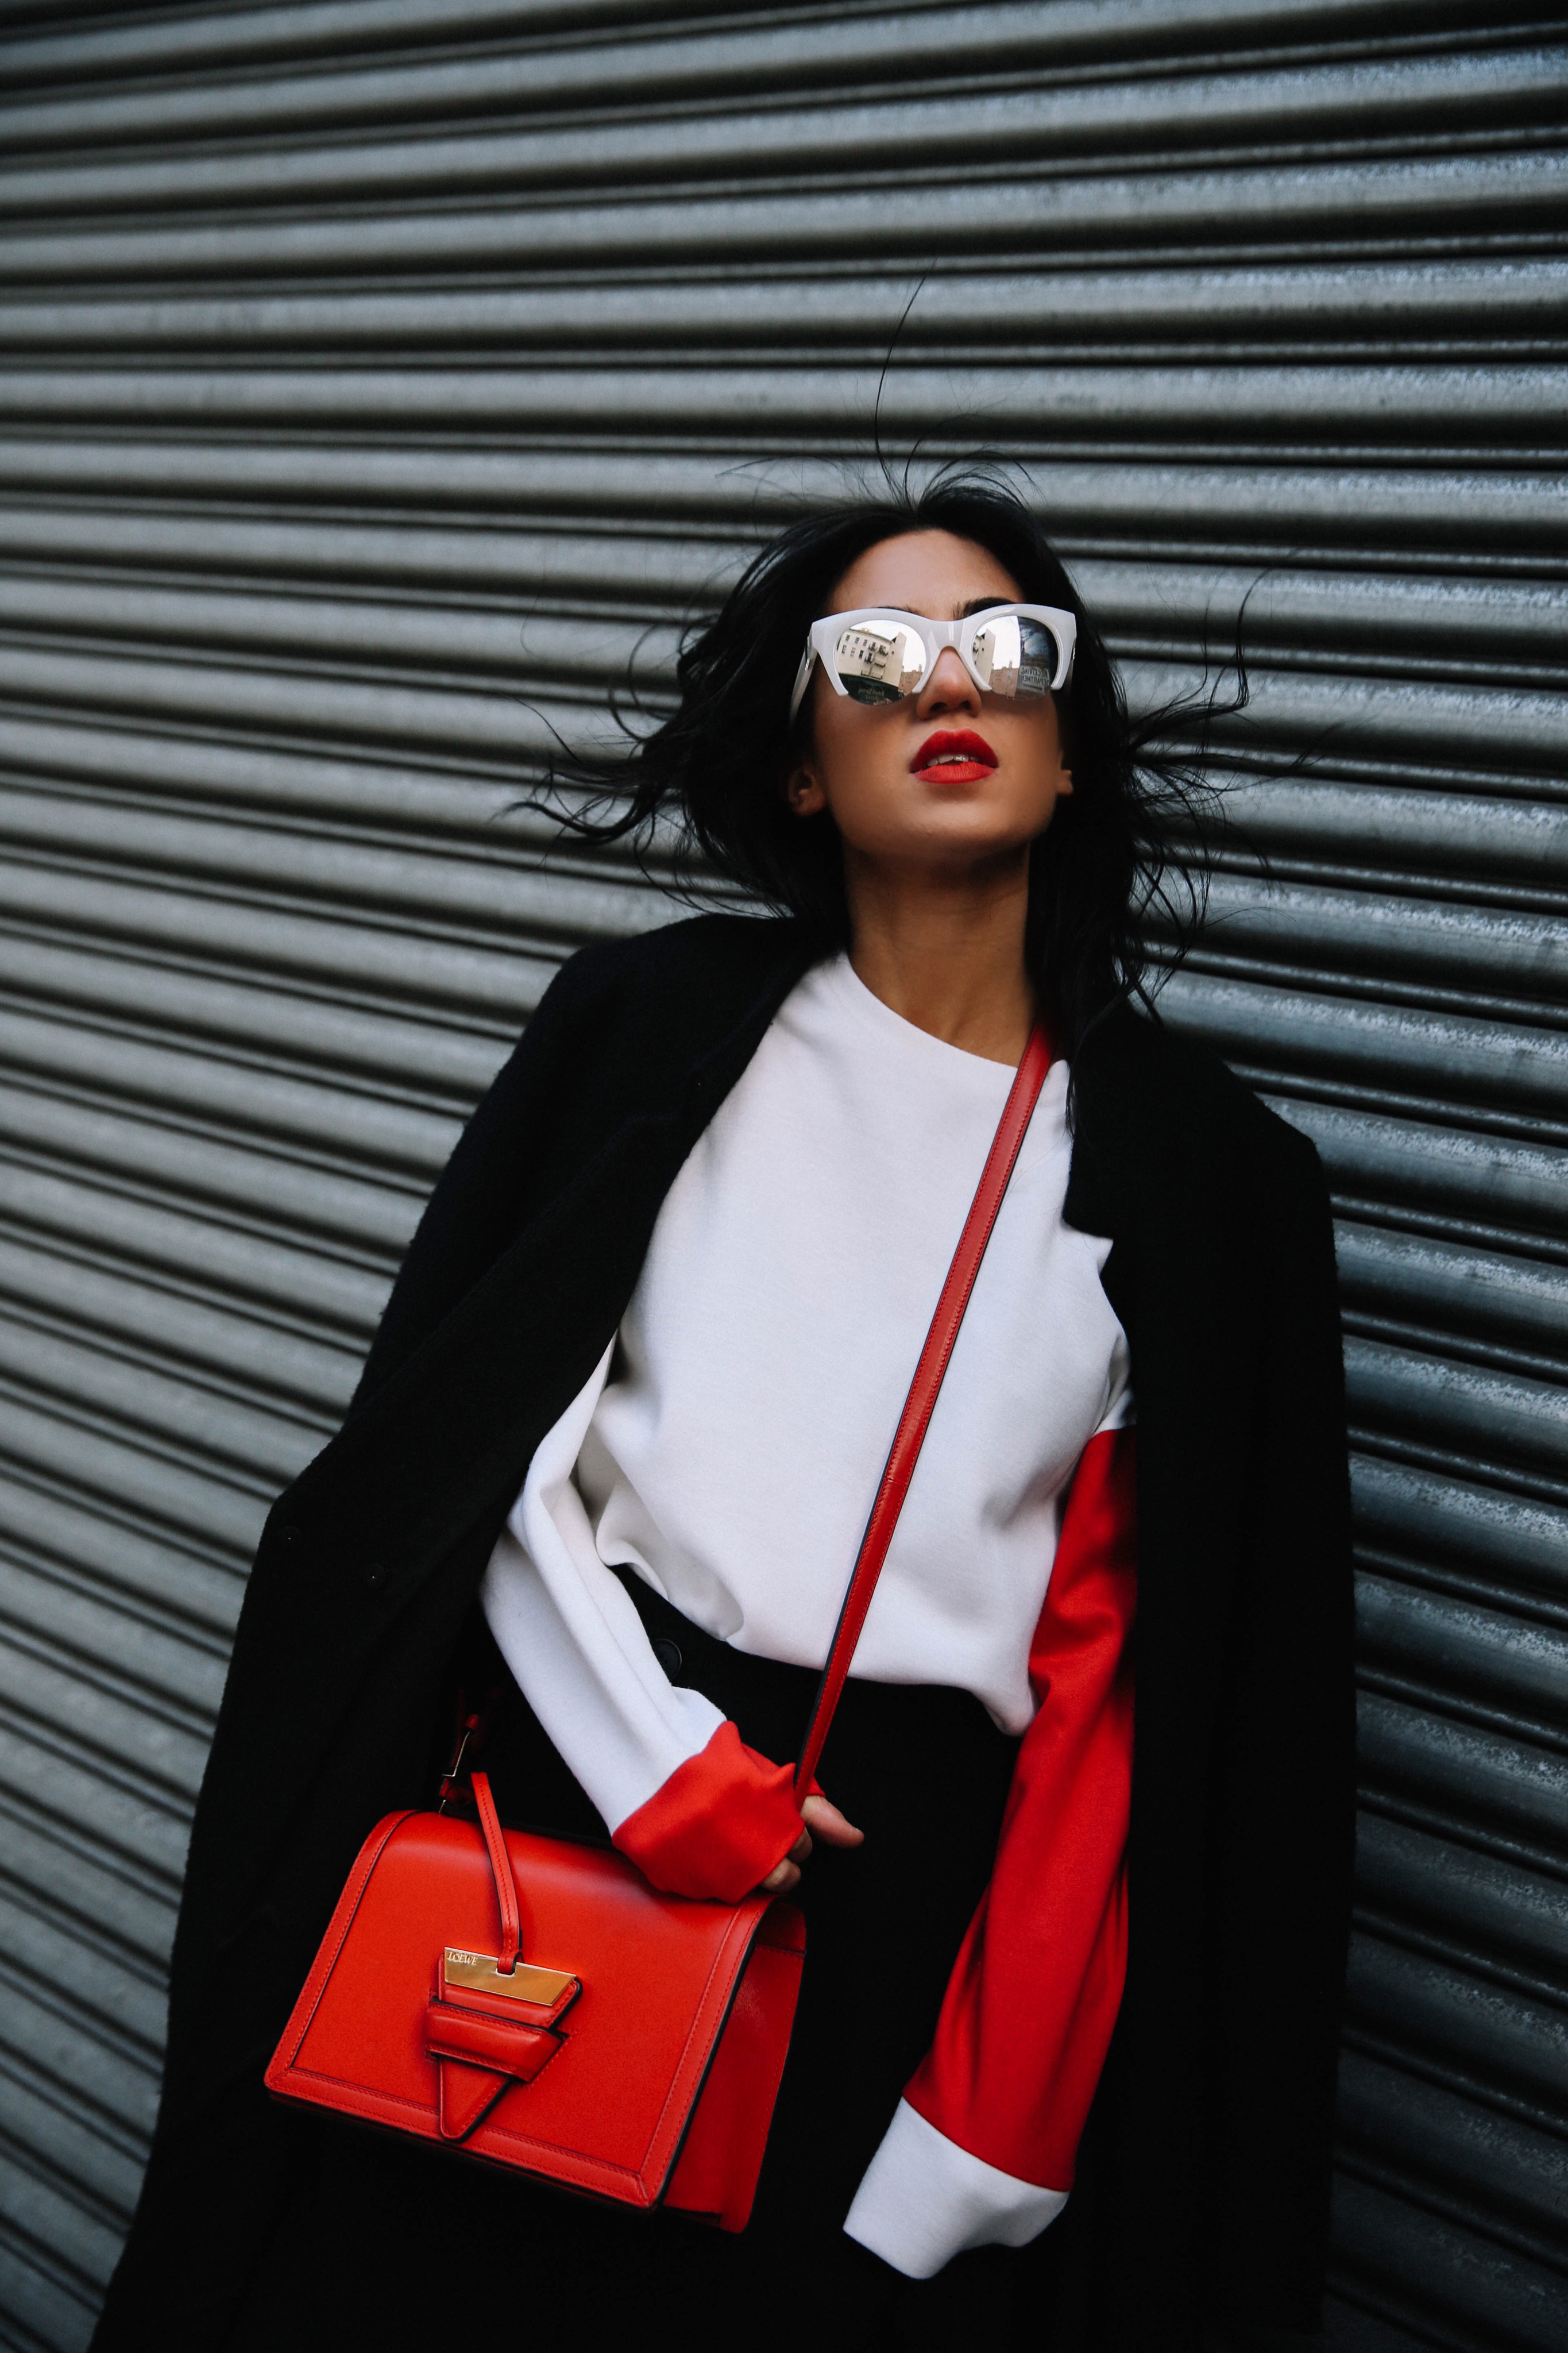 LA Blogger Tania Sarin in New York during NYFW with loewe bag and red lip